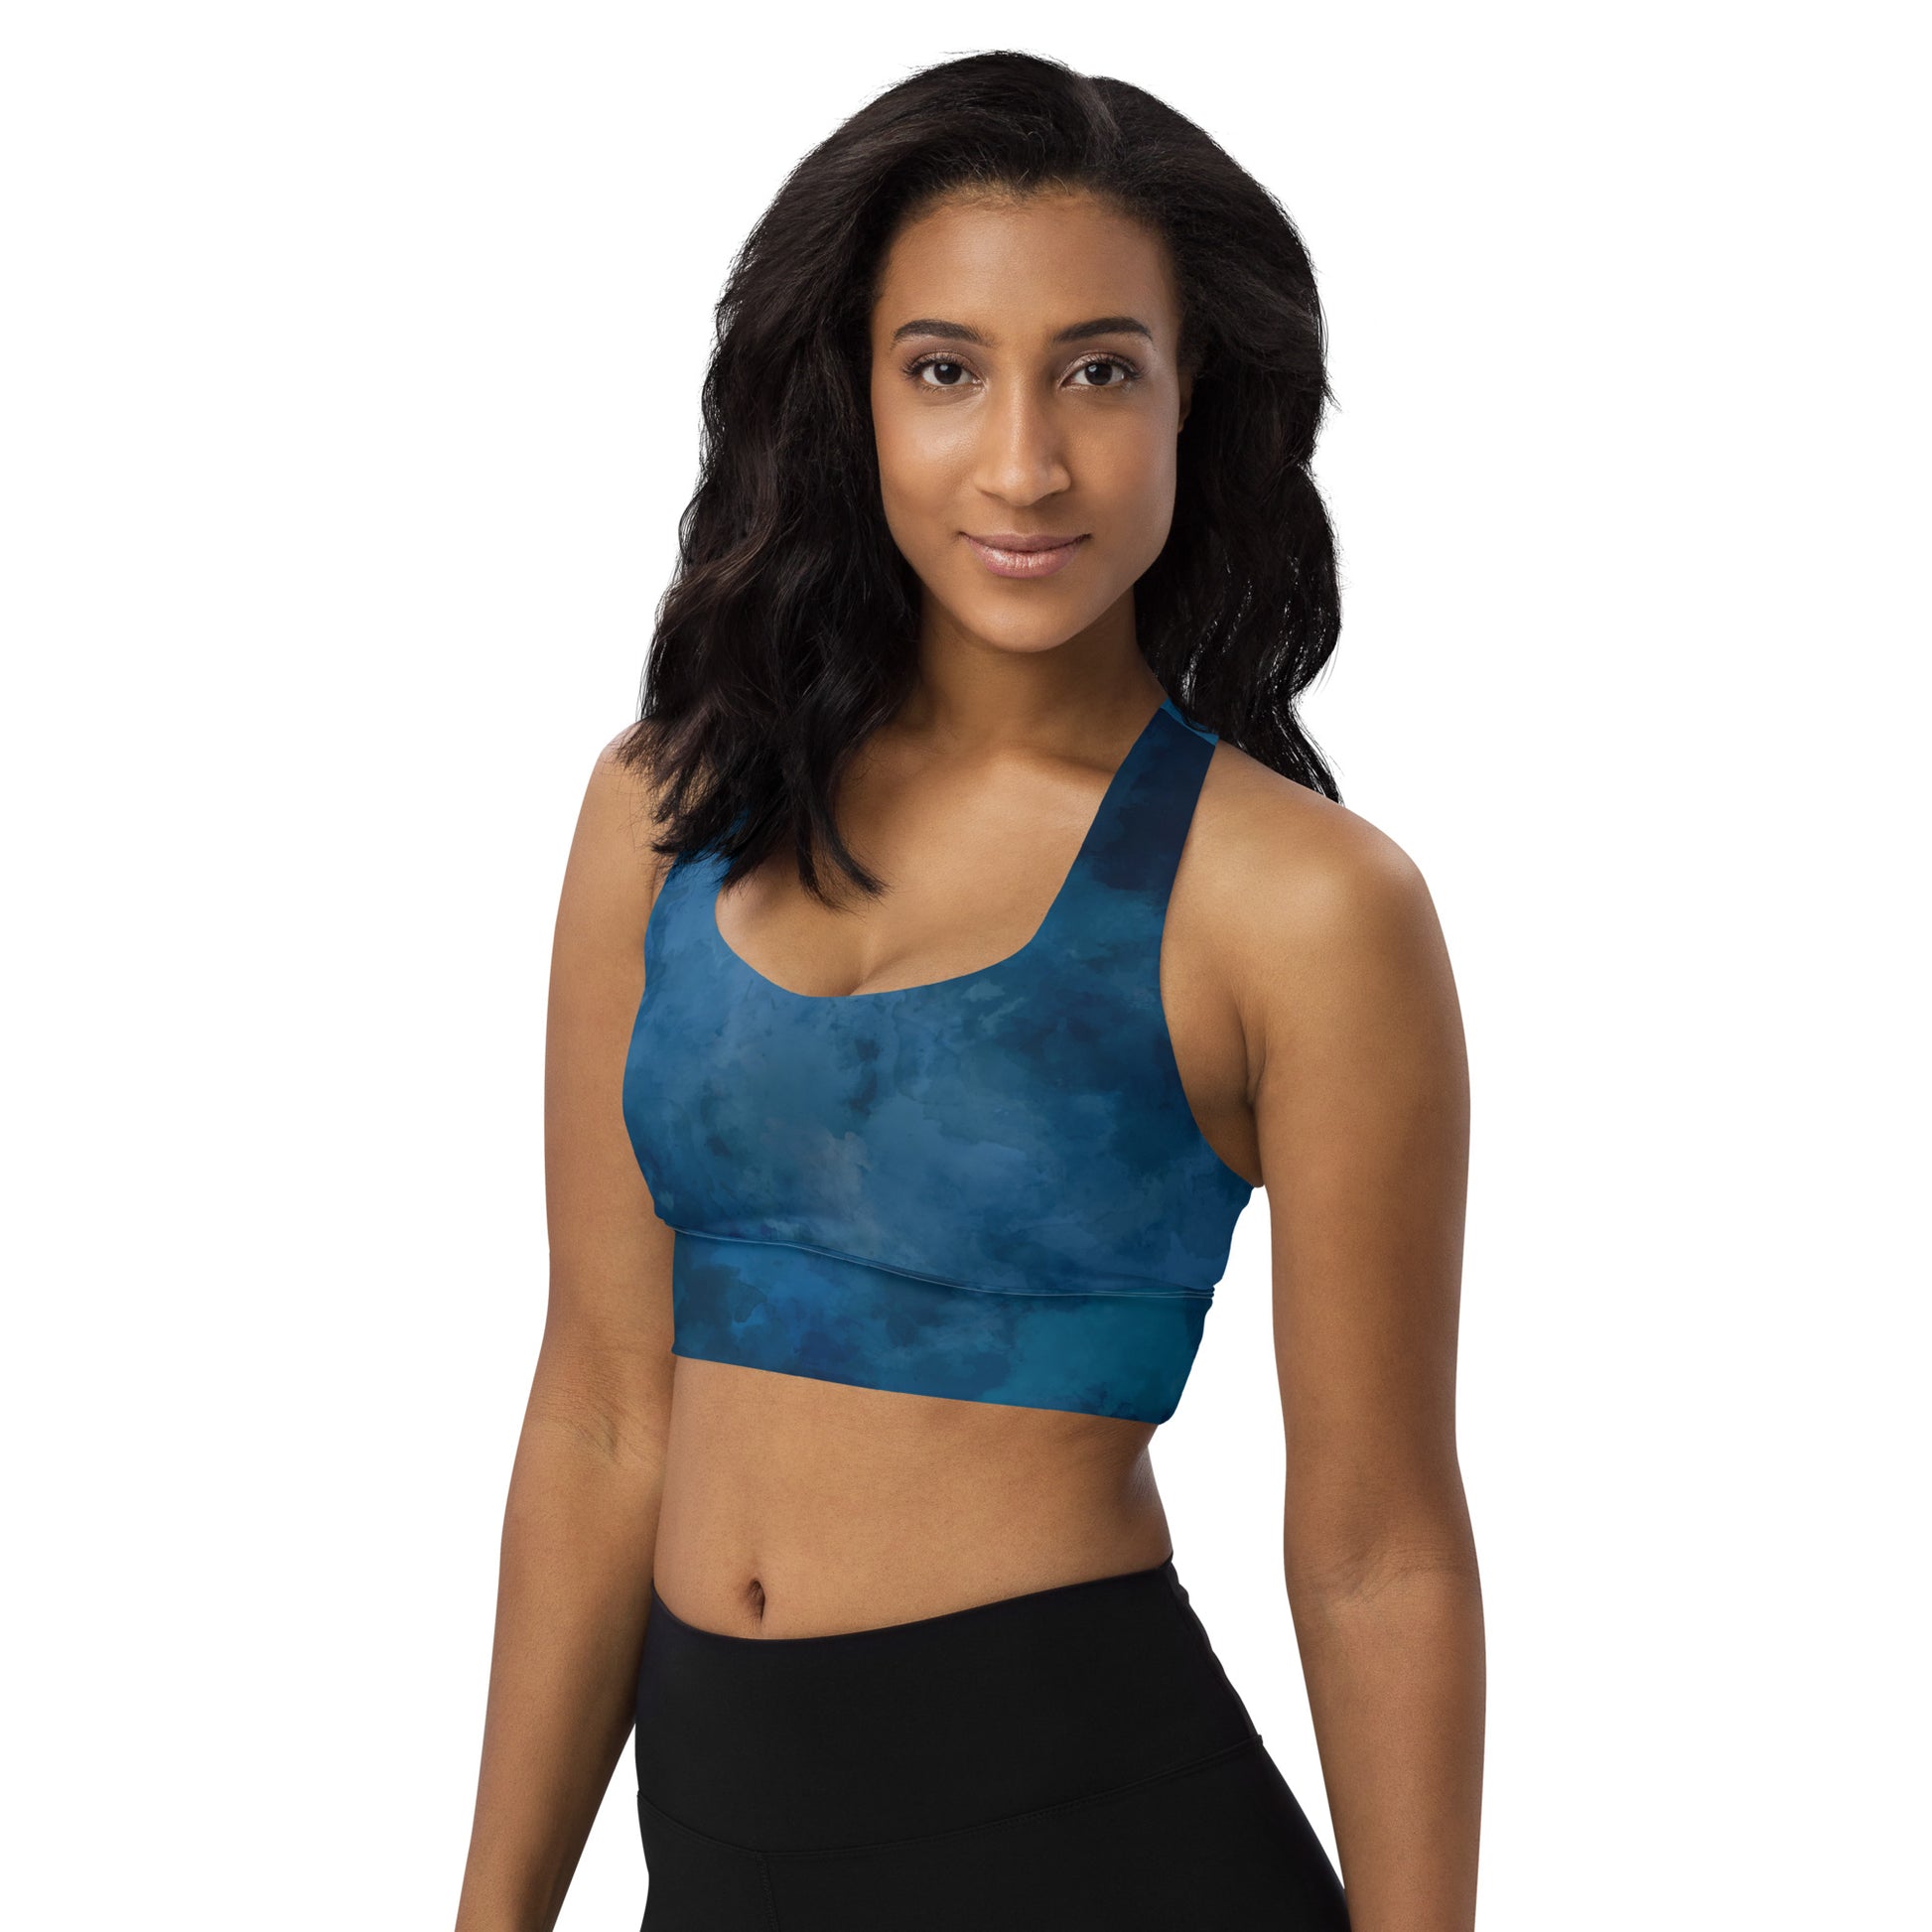 Long Line Sports Bras - Comfort and Style for Your Workout